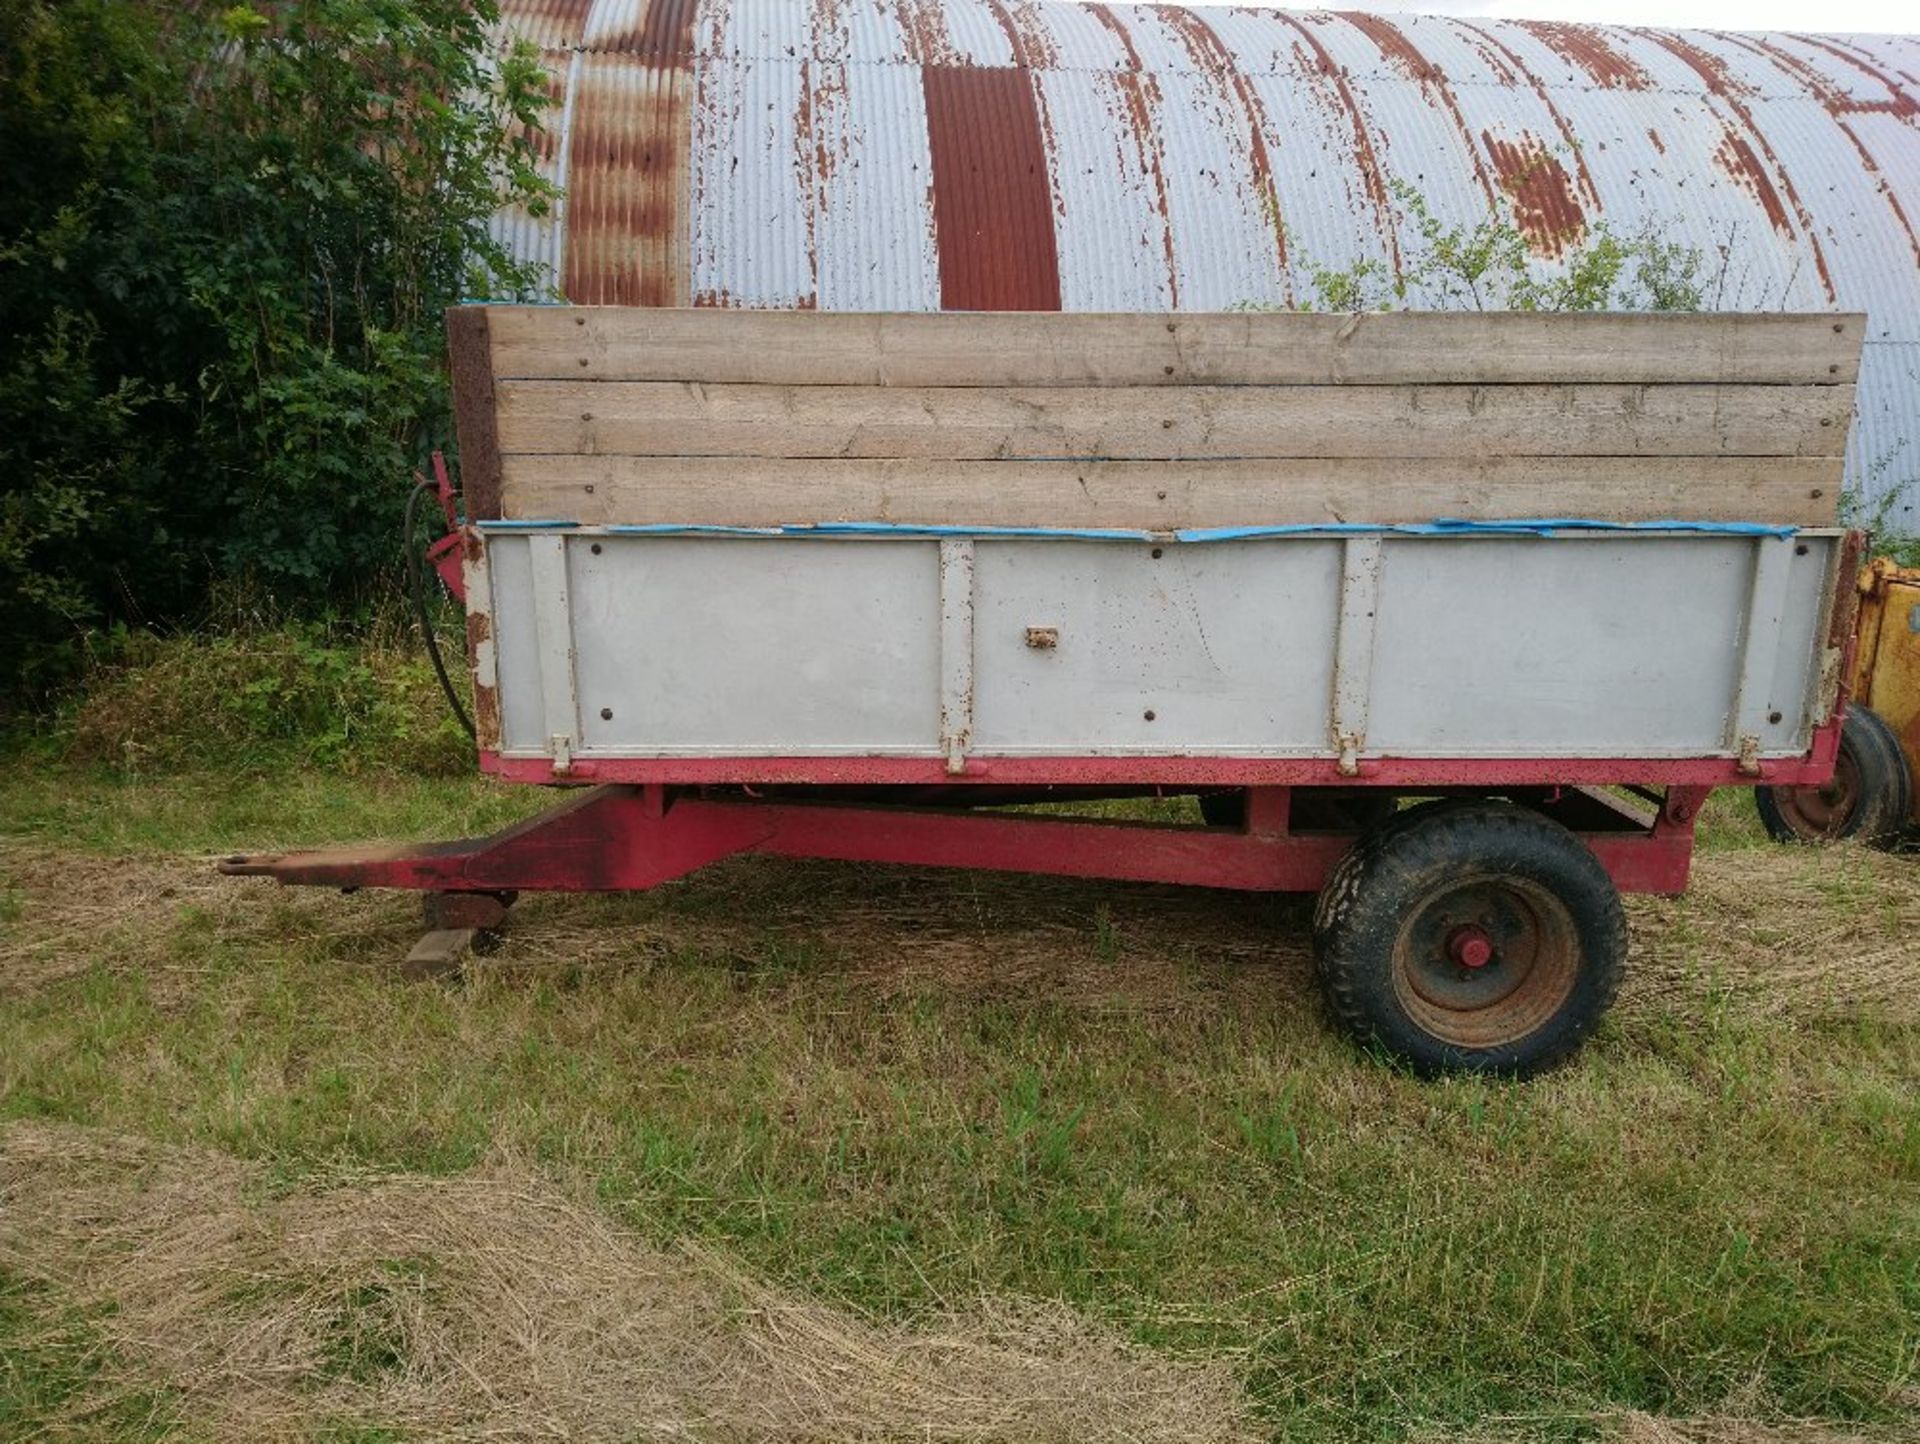 2 wheel hydraulic tipping trailer with metal sides below wooden extensions